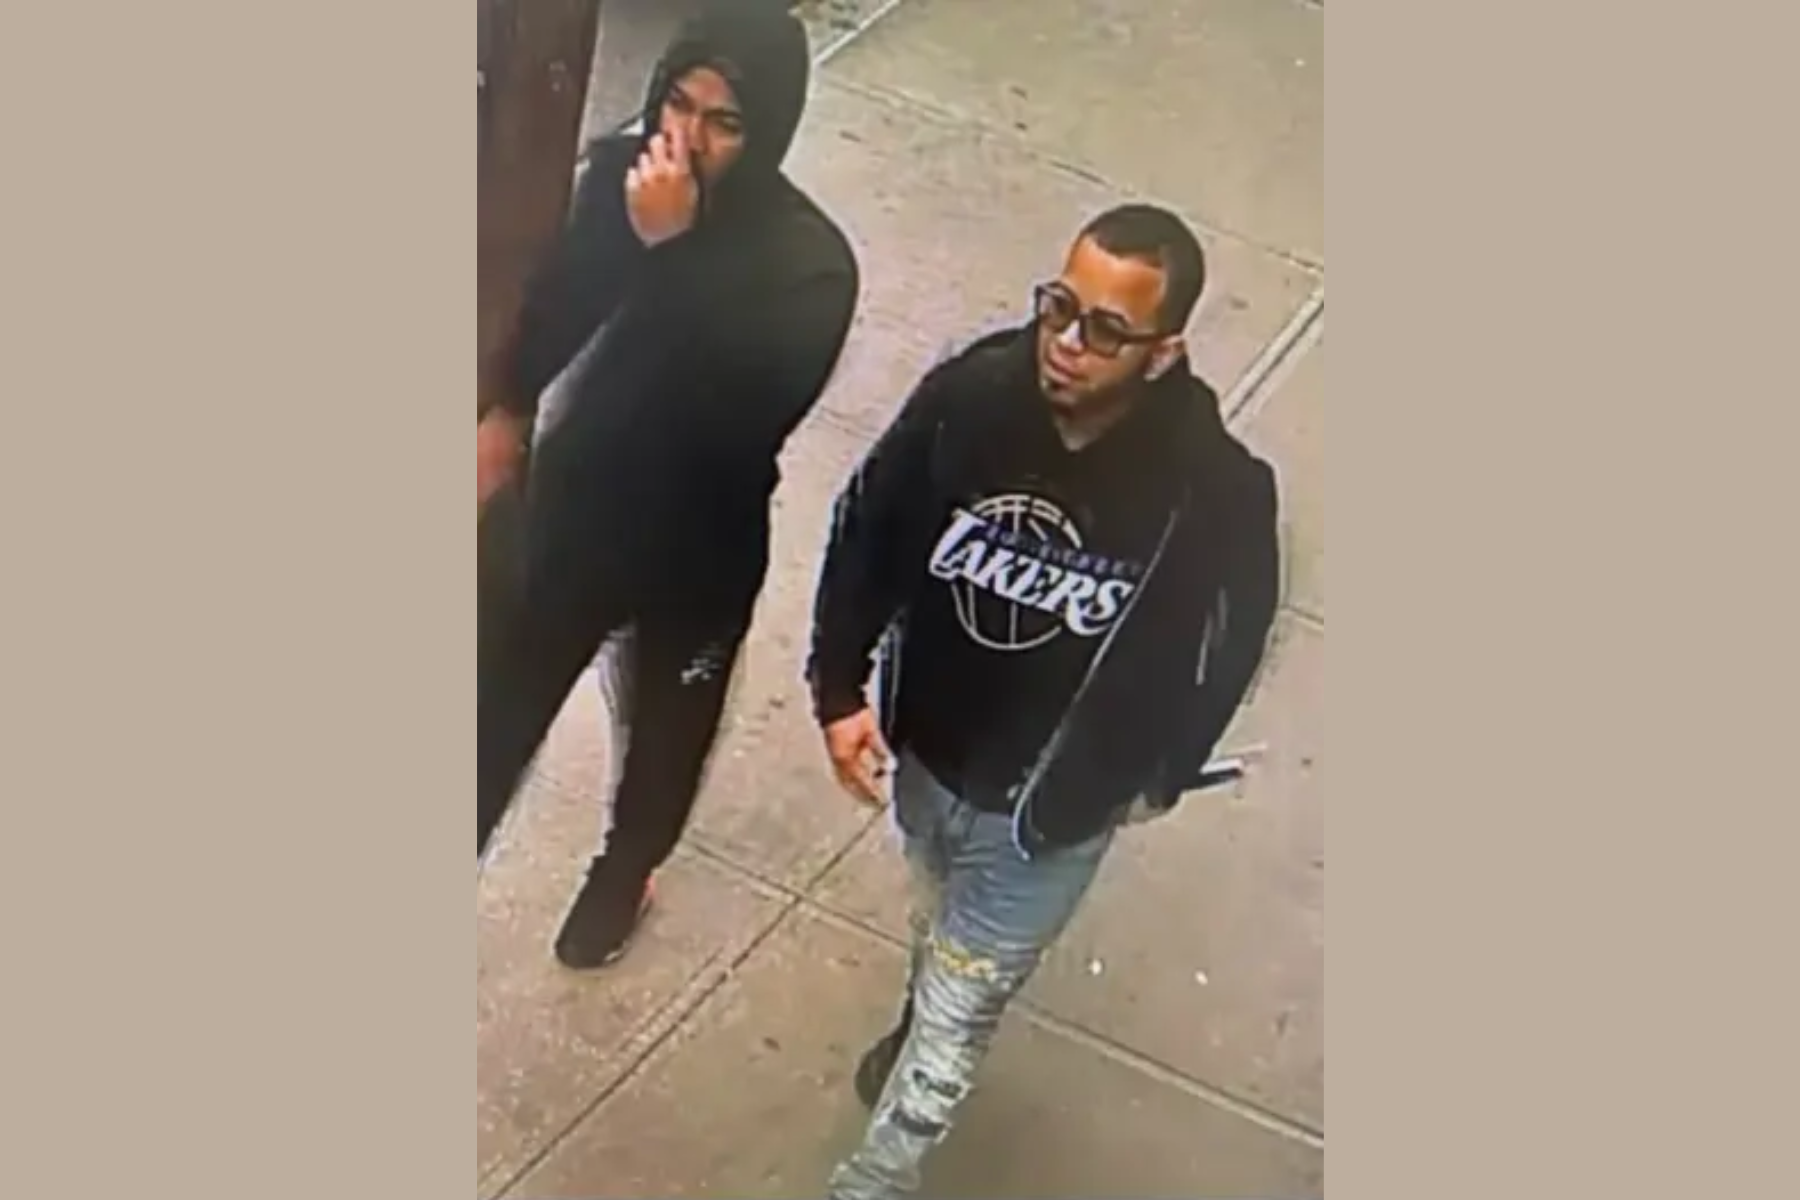 The two suspects are believed to be accomplices of the thieves